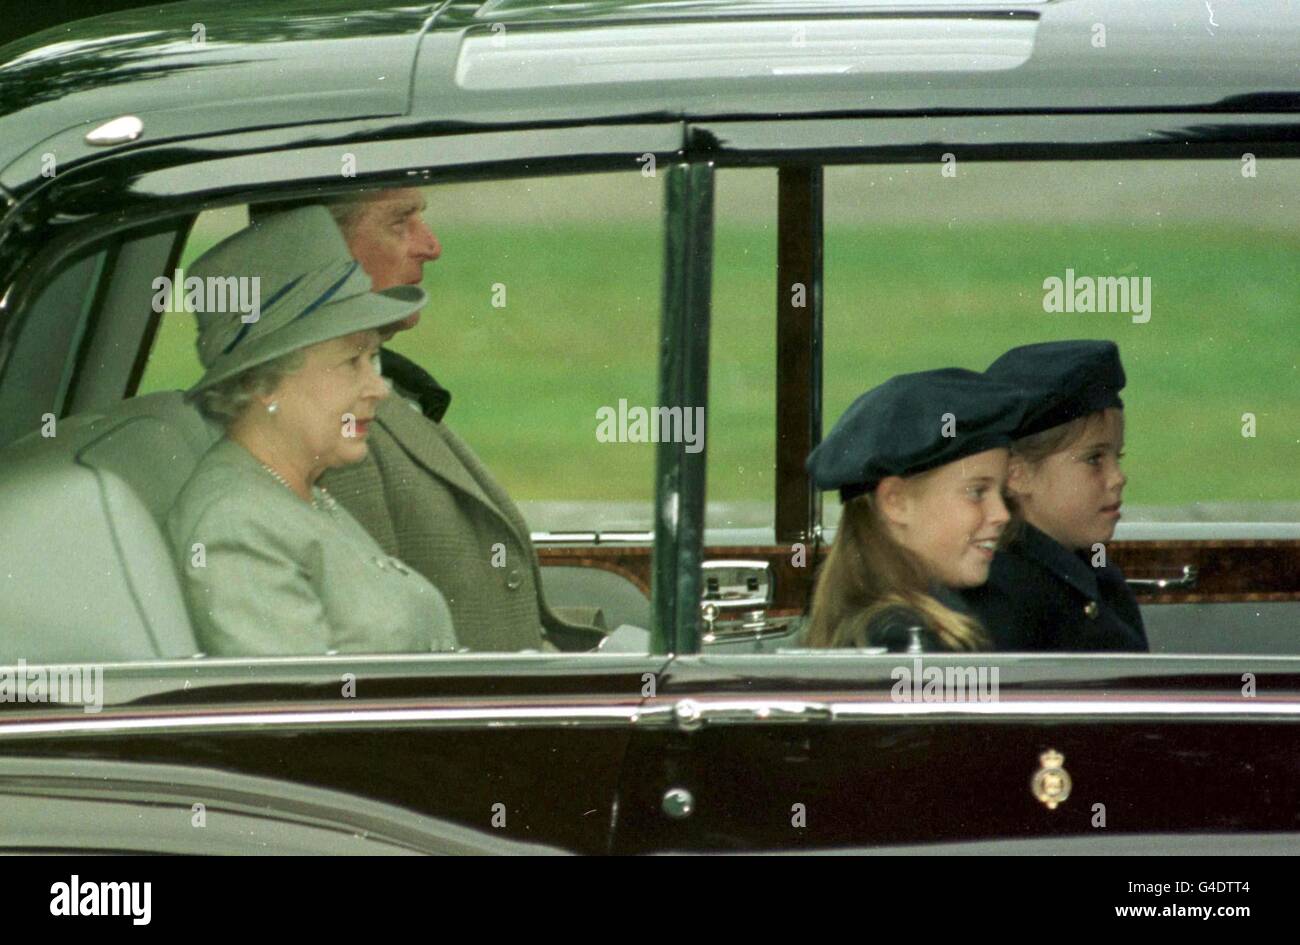 The Queen and Duke of Edinburgh with their grandchildren Princess Beatrice and Princess Eugenie (right) leaving Balmoral castle this morning (Monday) en route to Crathie Kirk church for memorial in memory of Diana, Princess of Wales. Stock Photo